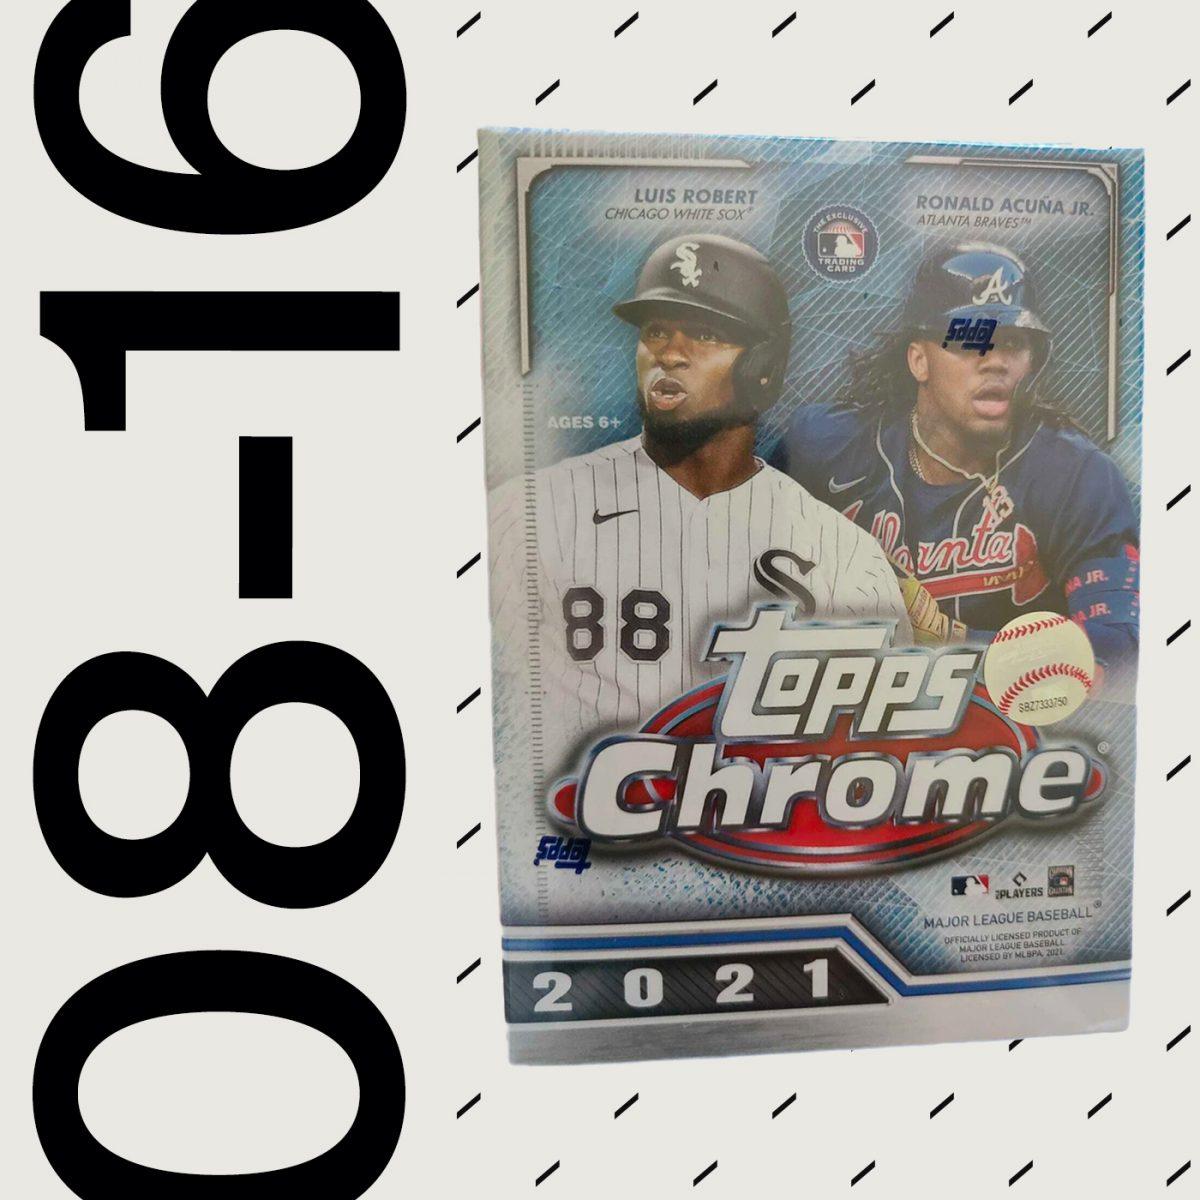 The Rip 08/16/2021 trading card releases